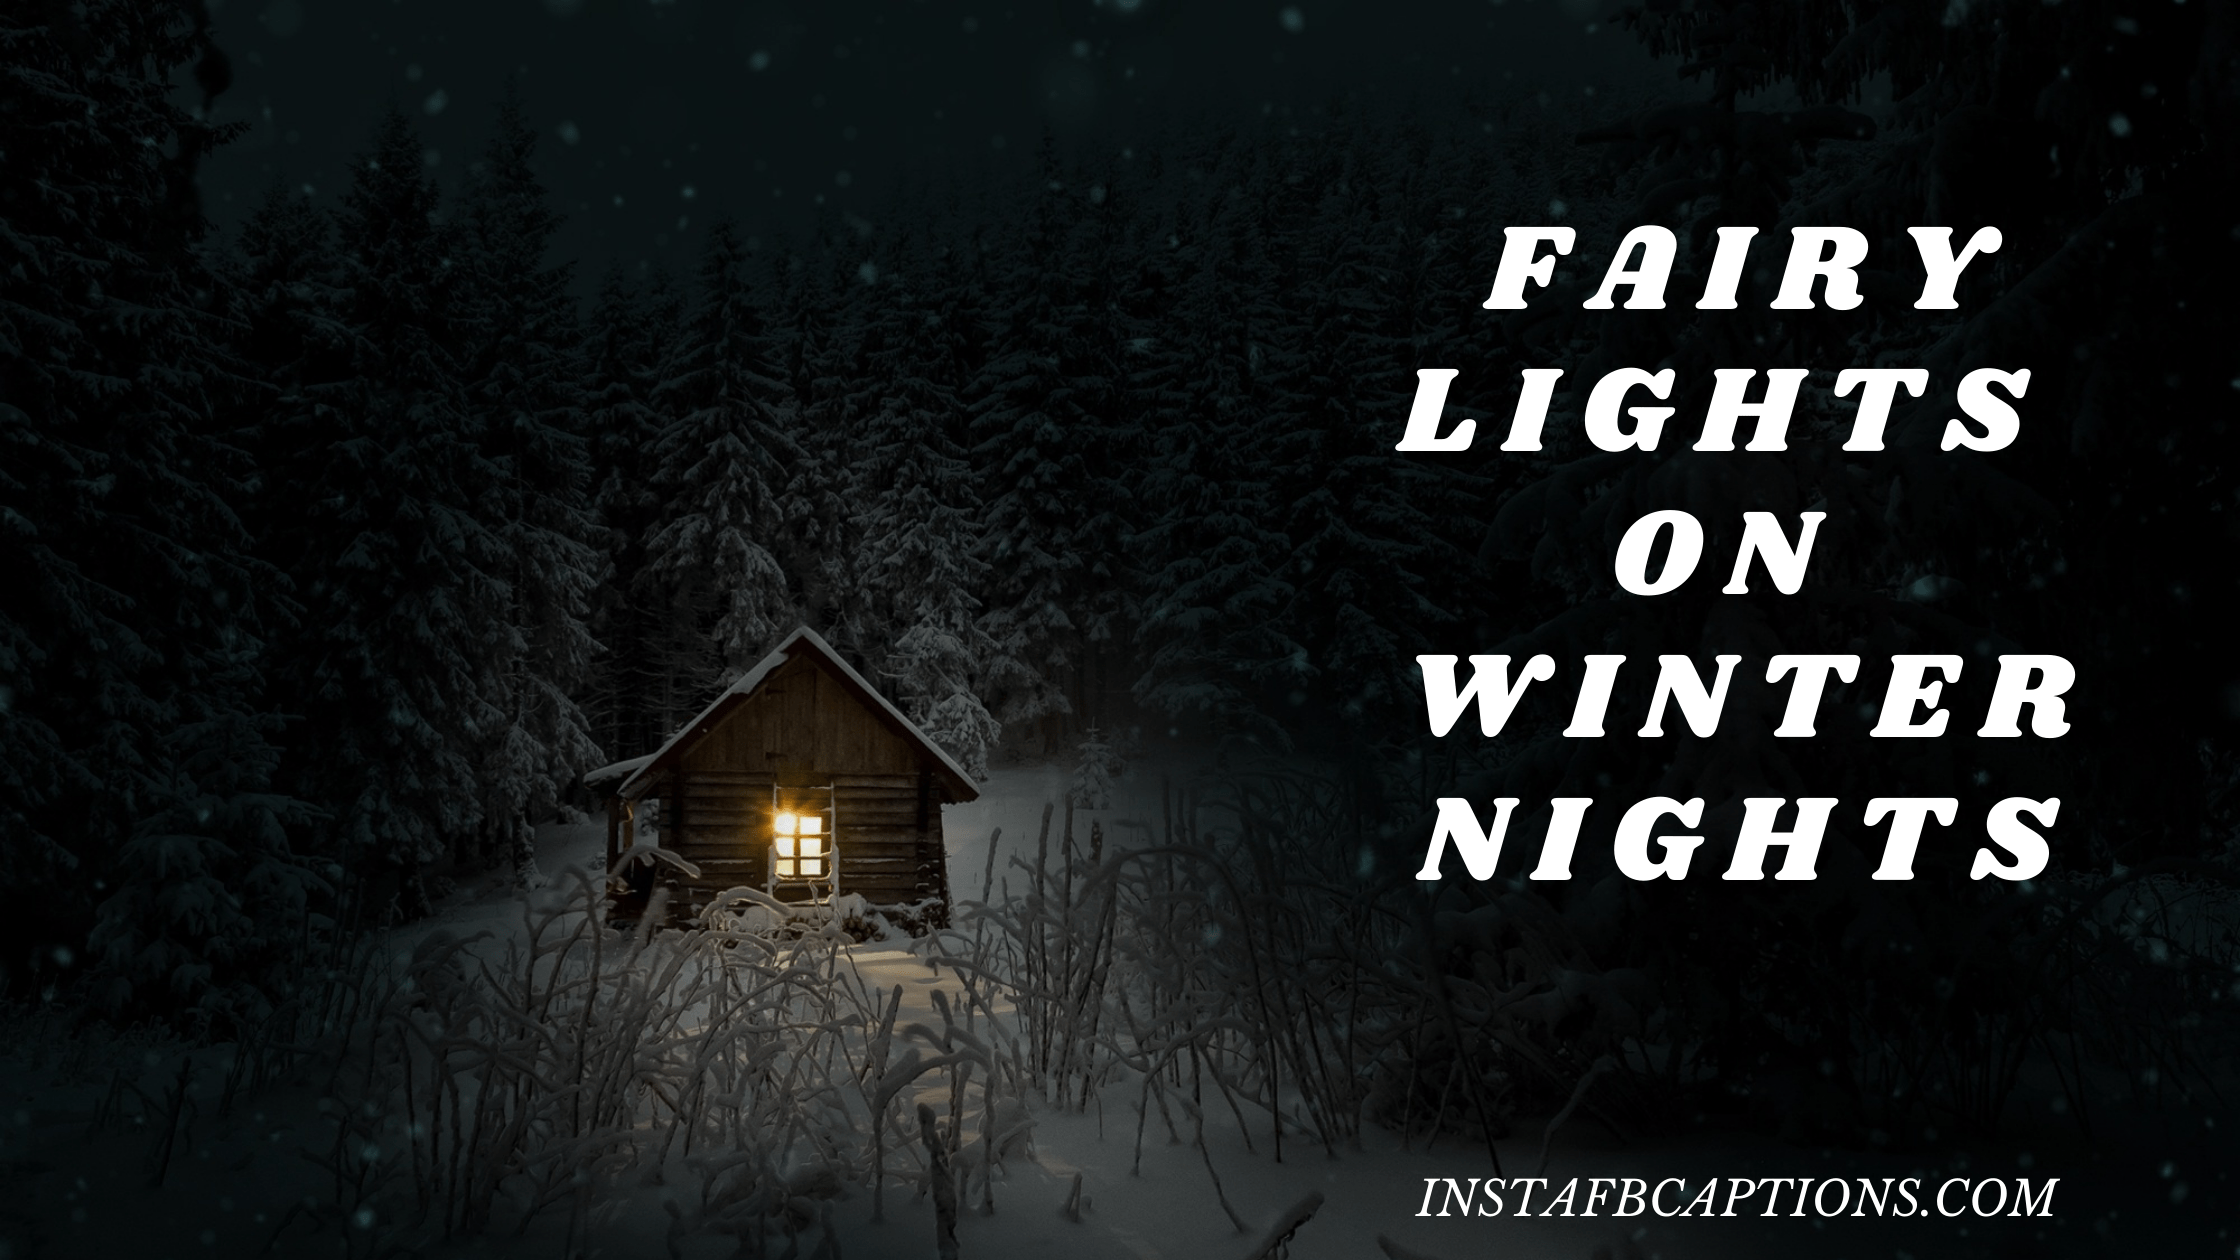 Fairy lights on winter nights  - Winter Night Captions for Instagram - Night Captions Quotes for Night Instagram Photos in 2023